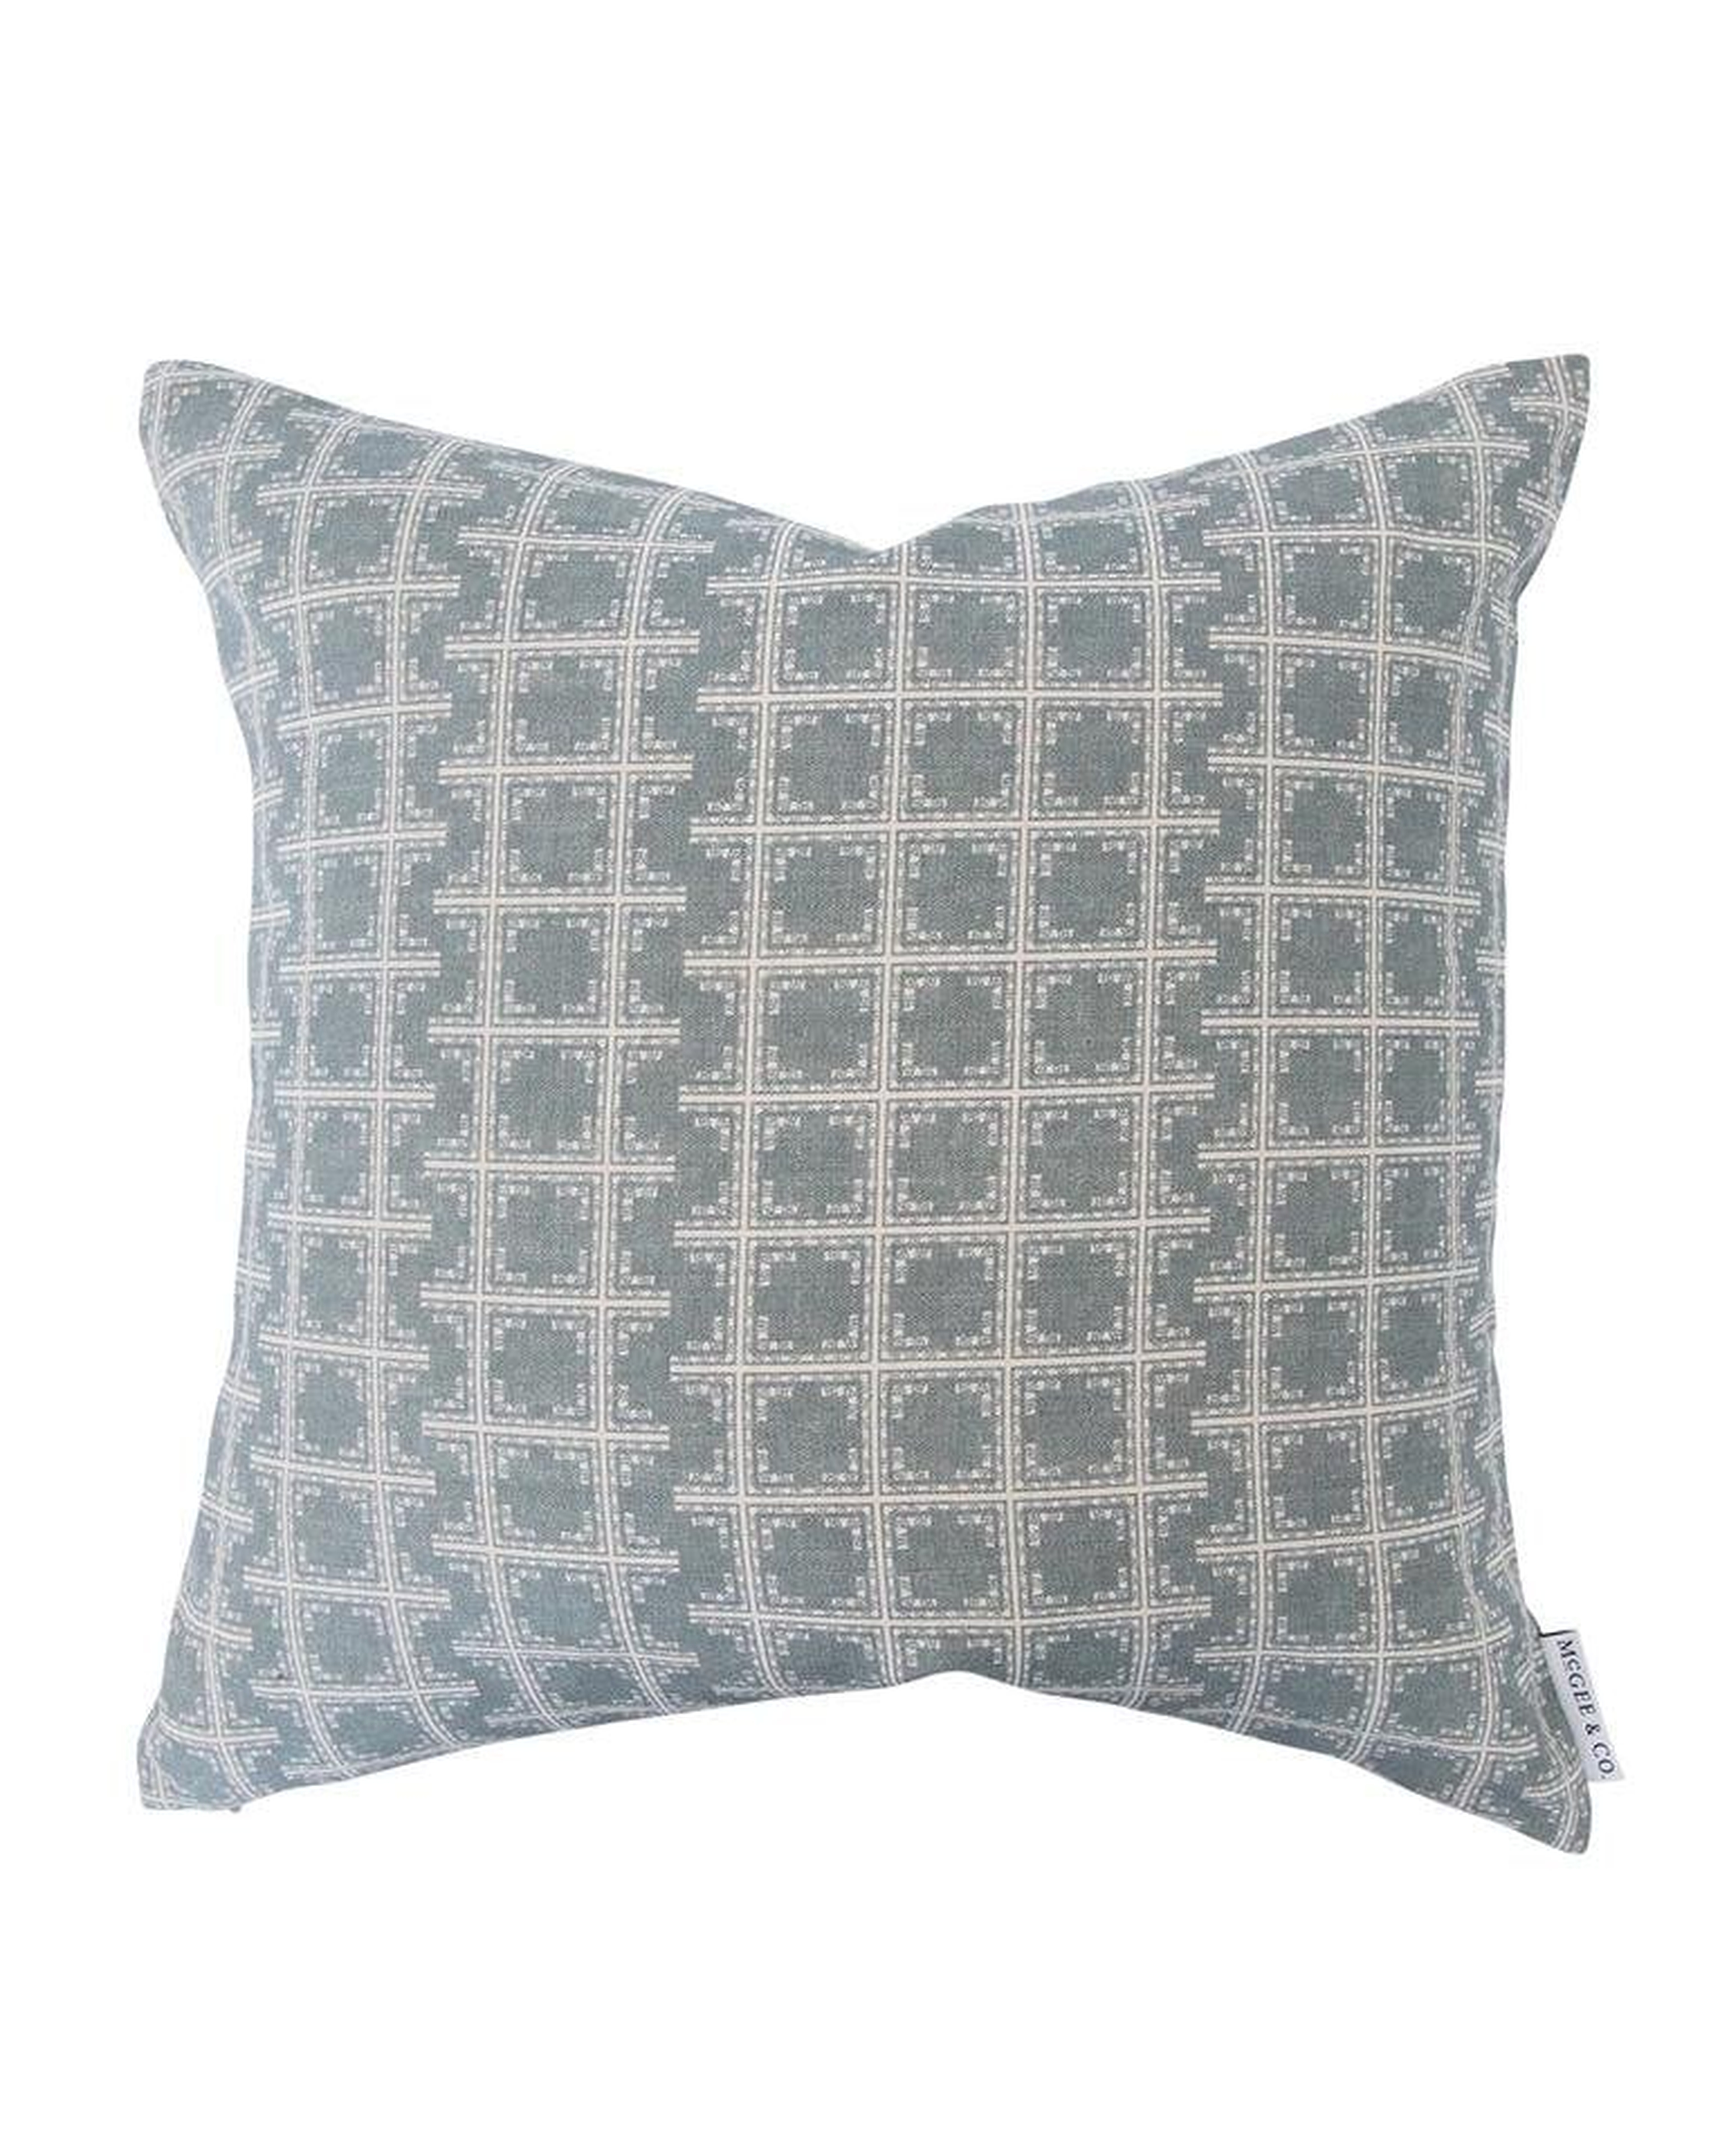 FITZ PILLOW COVER - McGee & Co.